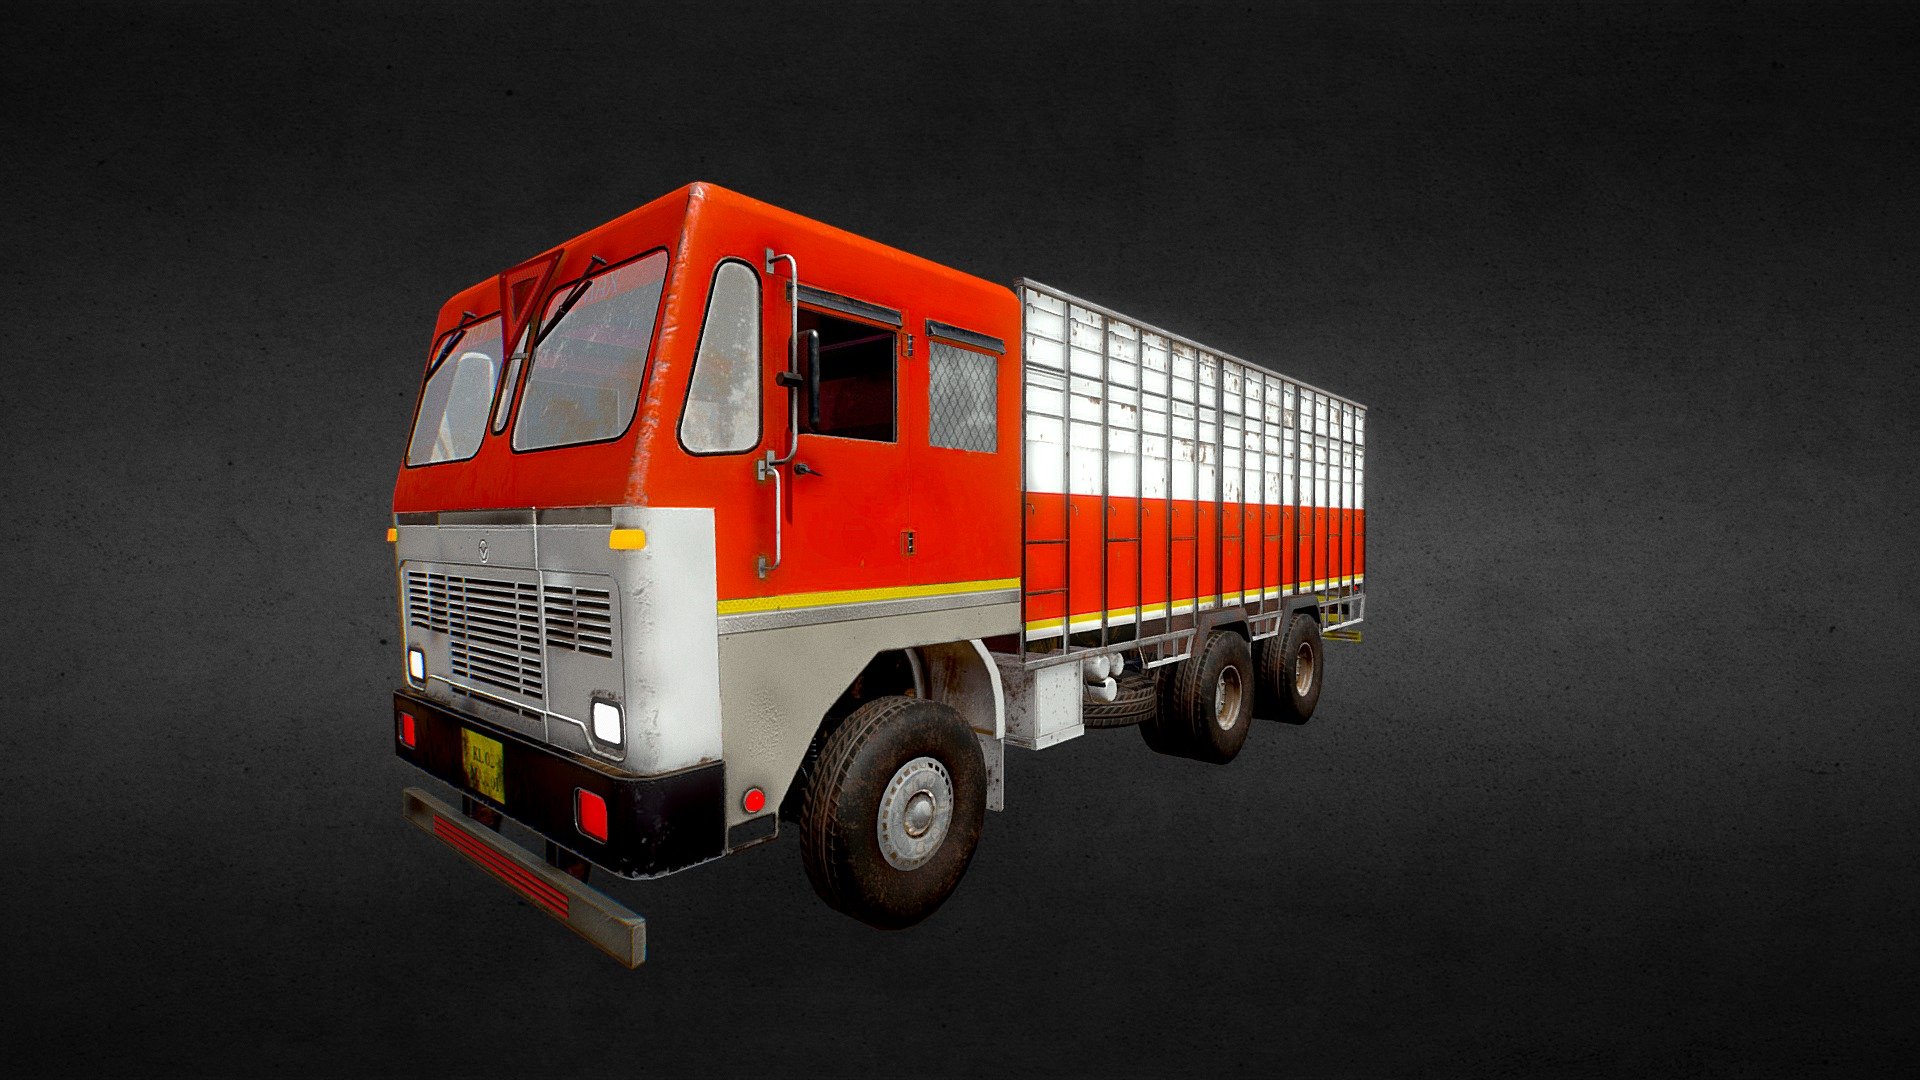 Indian Lorry- truck
Modeling in maya
texturing in substance 3D Painter - The_Truck - 3D model by Ajay S Anil (@ajaysanilhhp) 3d model